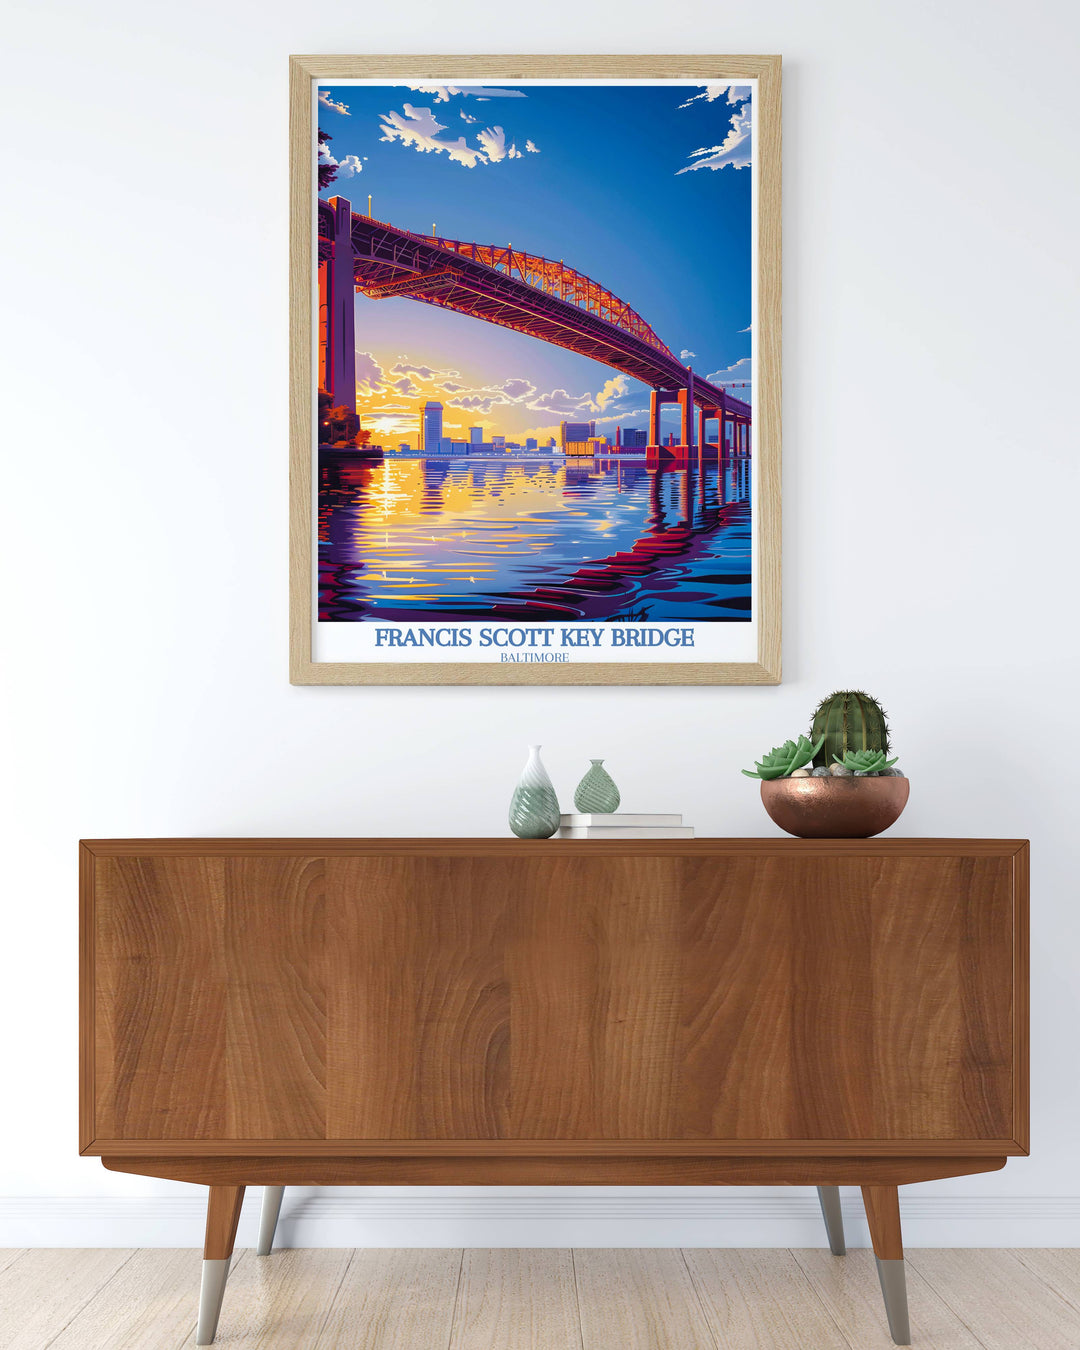 Artistic rendering of the Francis Scott Key Bridge in a Maryland print, depicted in bold strokes and dramatic lighting, perfect for a travel gift.